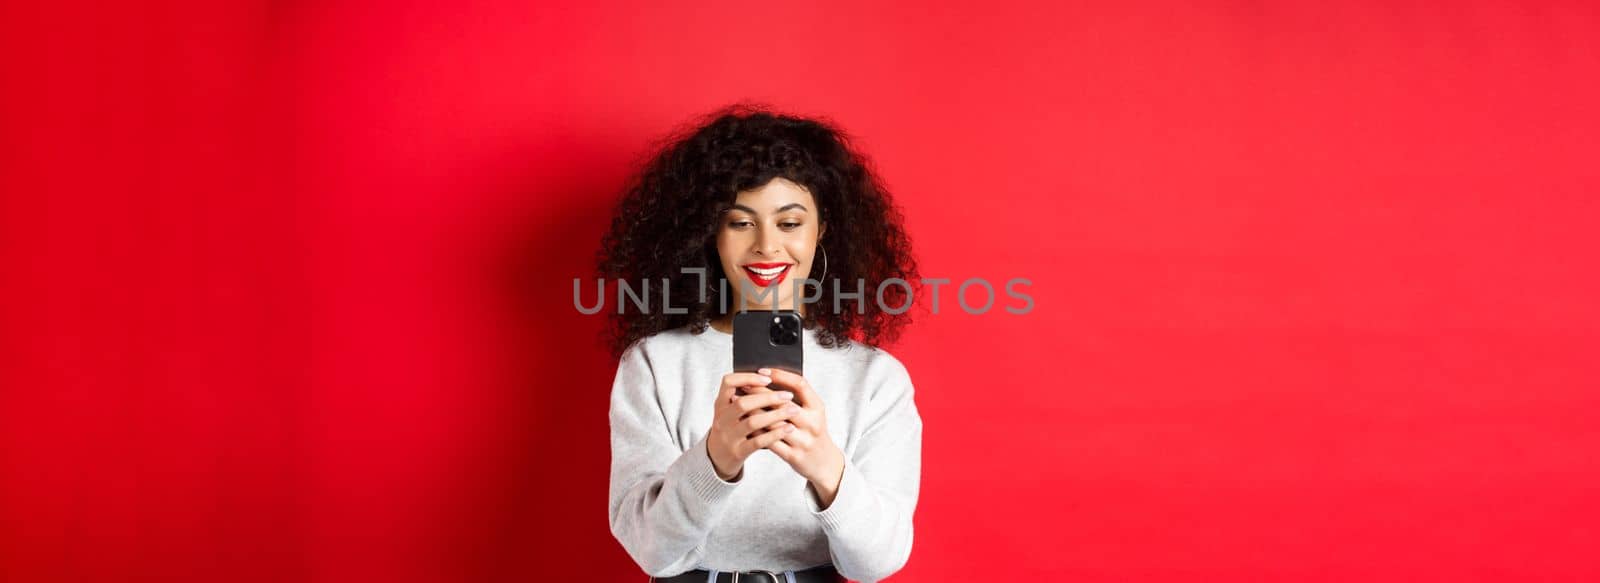 Smiling modern girl taking photos on smartphone, looking at screen and recording video, standing against red background.